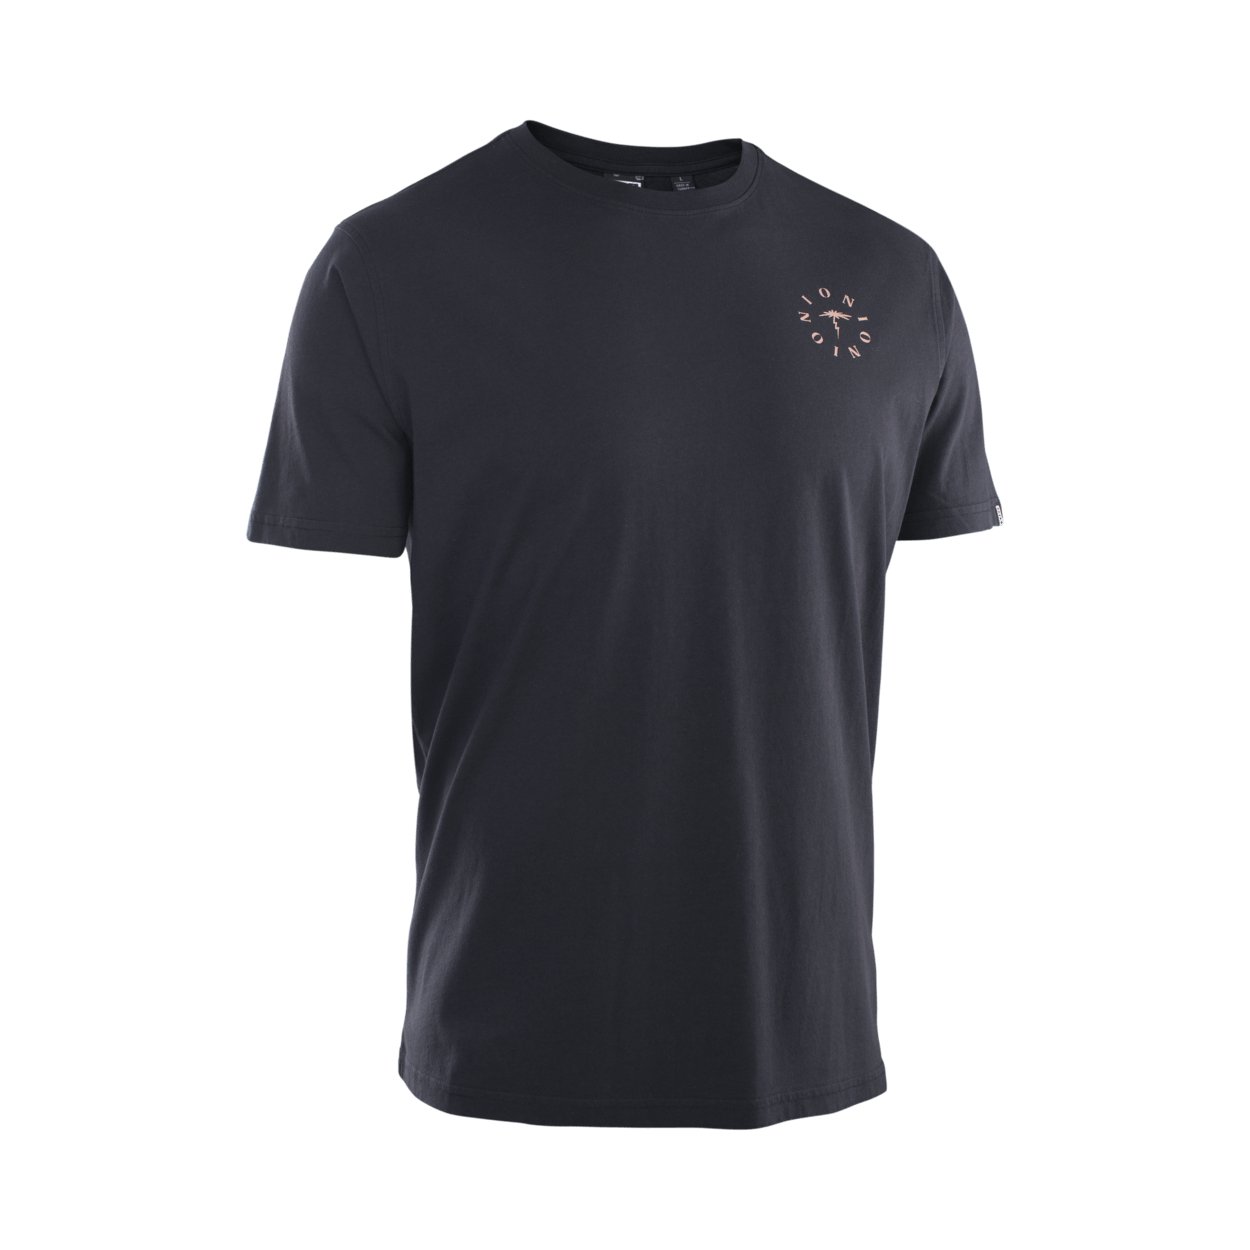 ION Tee Vibes SS men 2023 - Worthing Watersports - 9010583102733 - Apparel - ION Bike